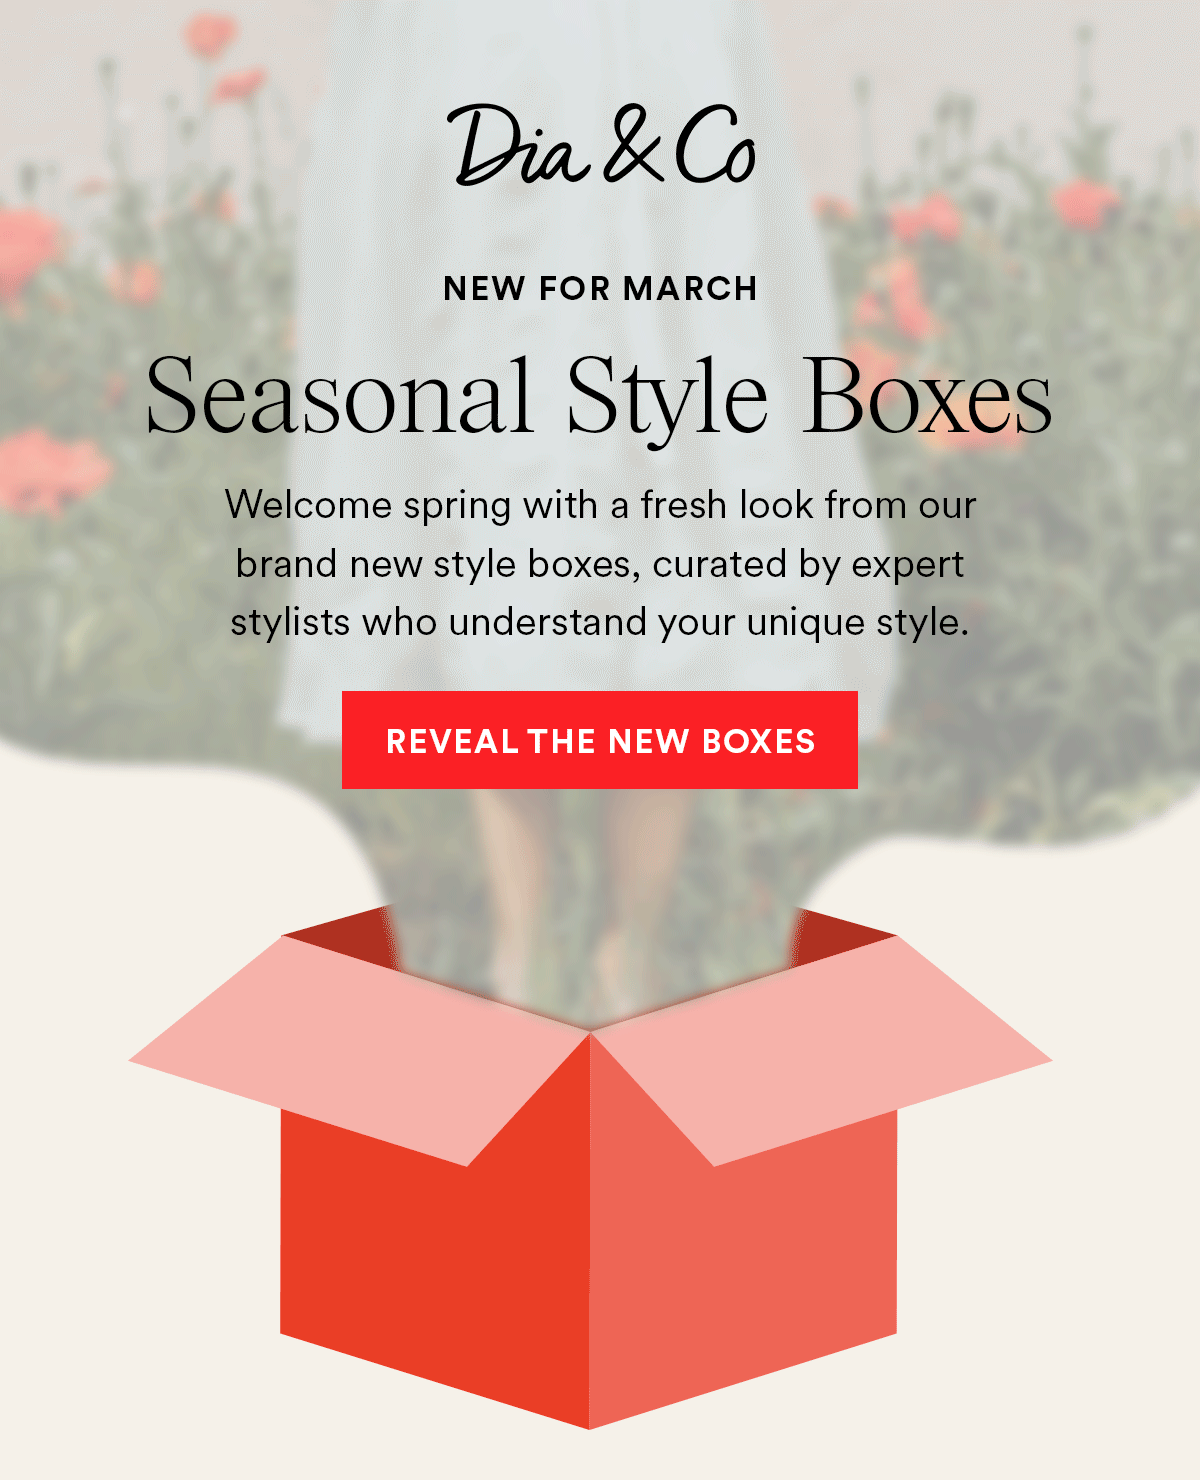 New for March Seasonal Style Boxes. Reveal The New Boxes